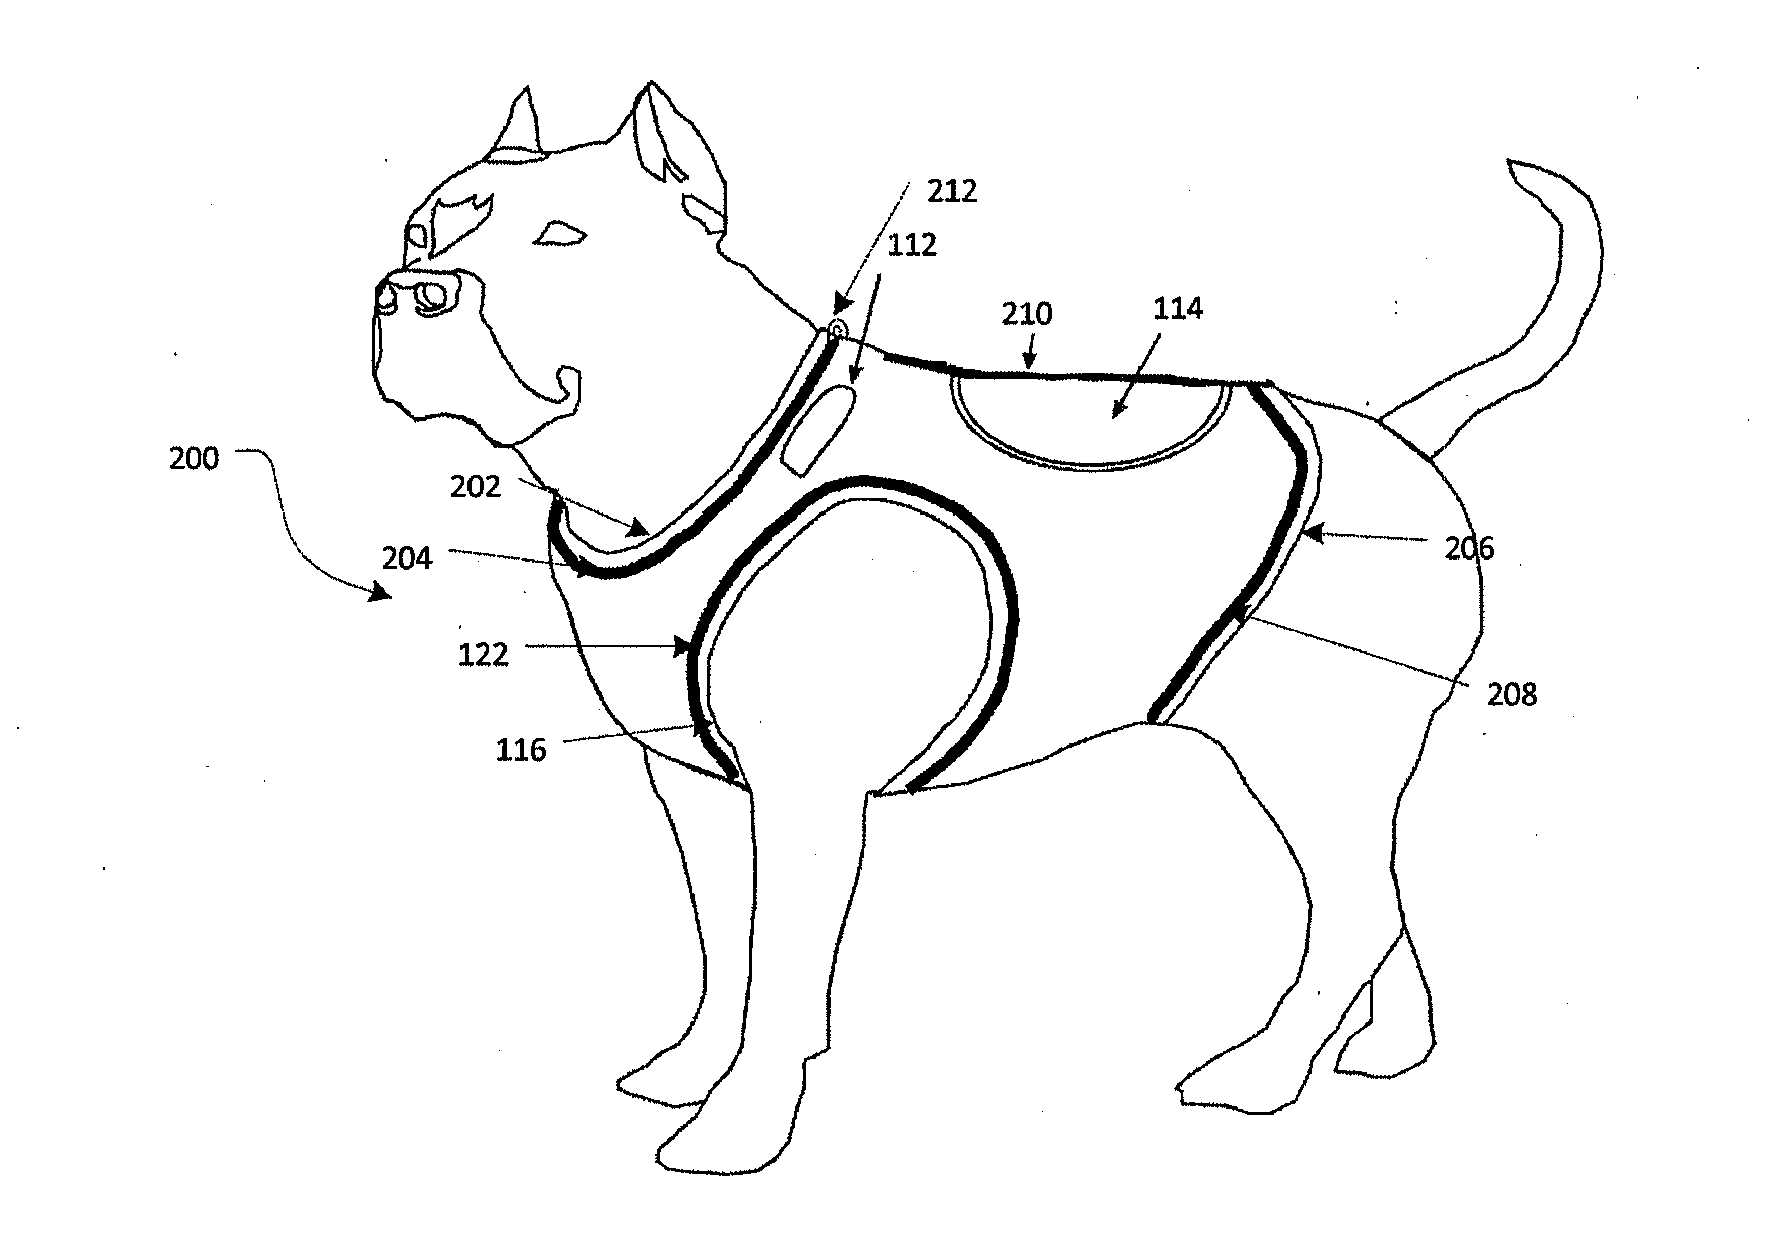 Motion control weighted canine fitness garment